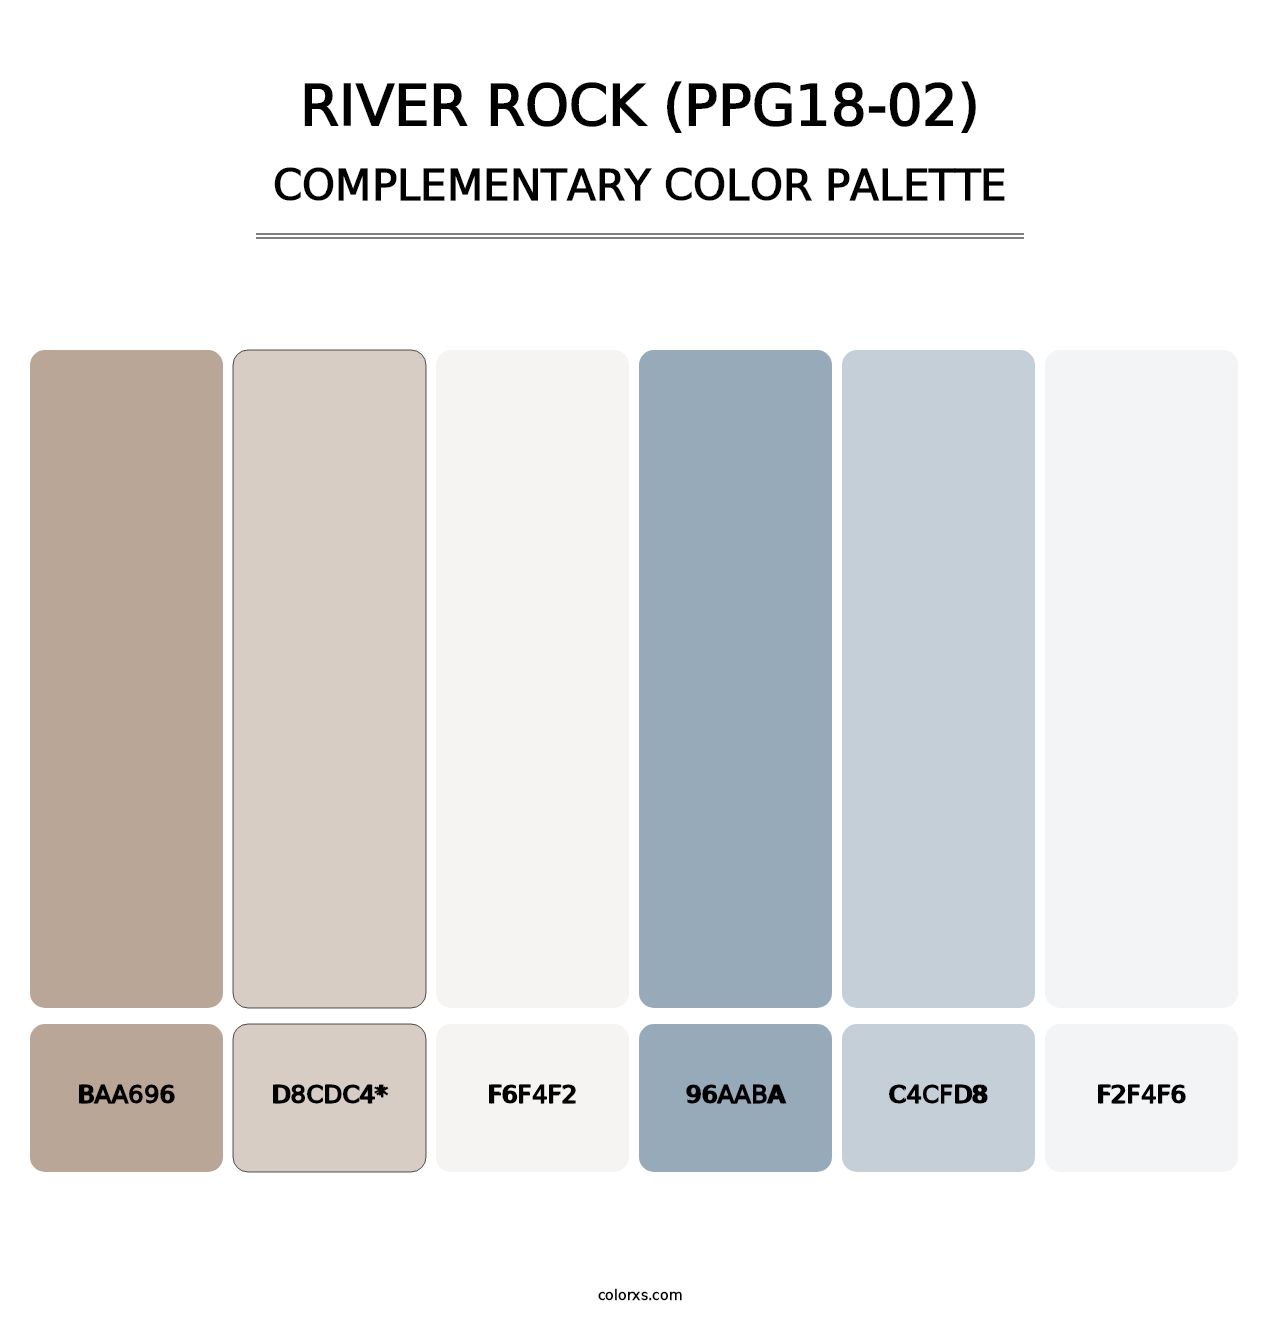 River Rock (PPG18-02) - Complementary Color Palette